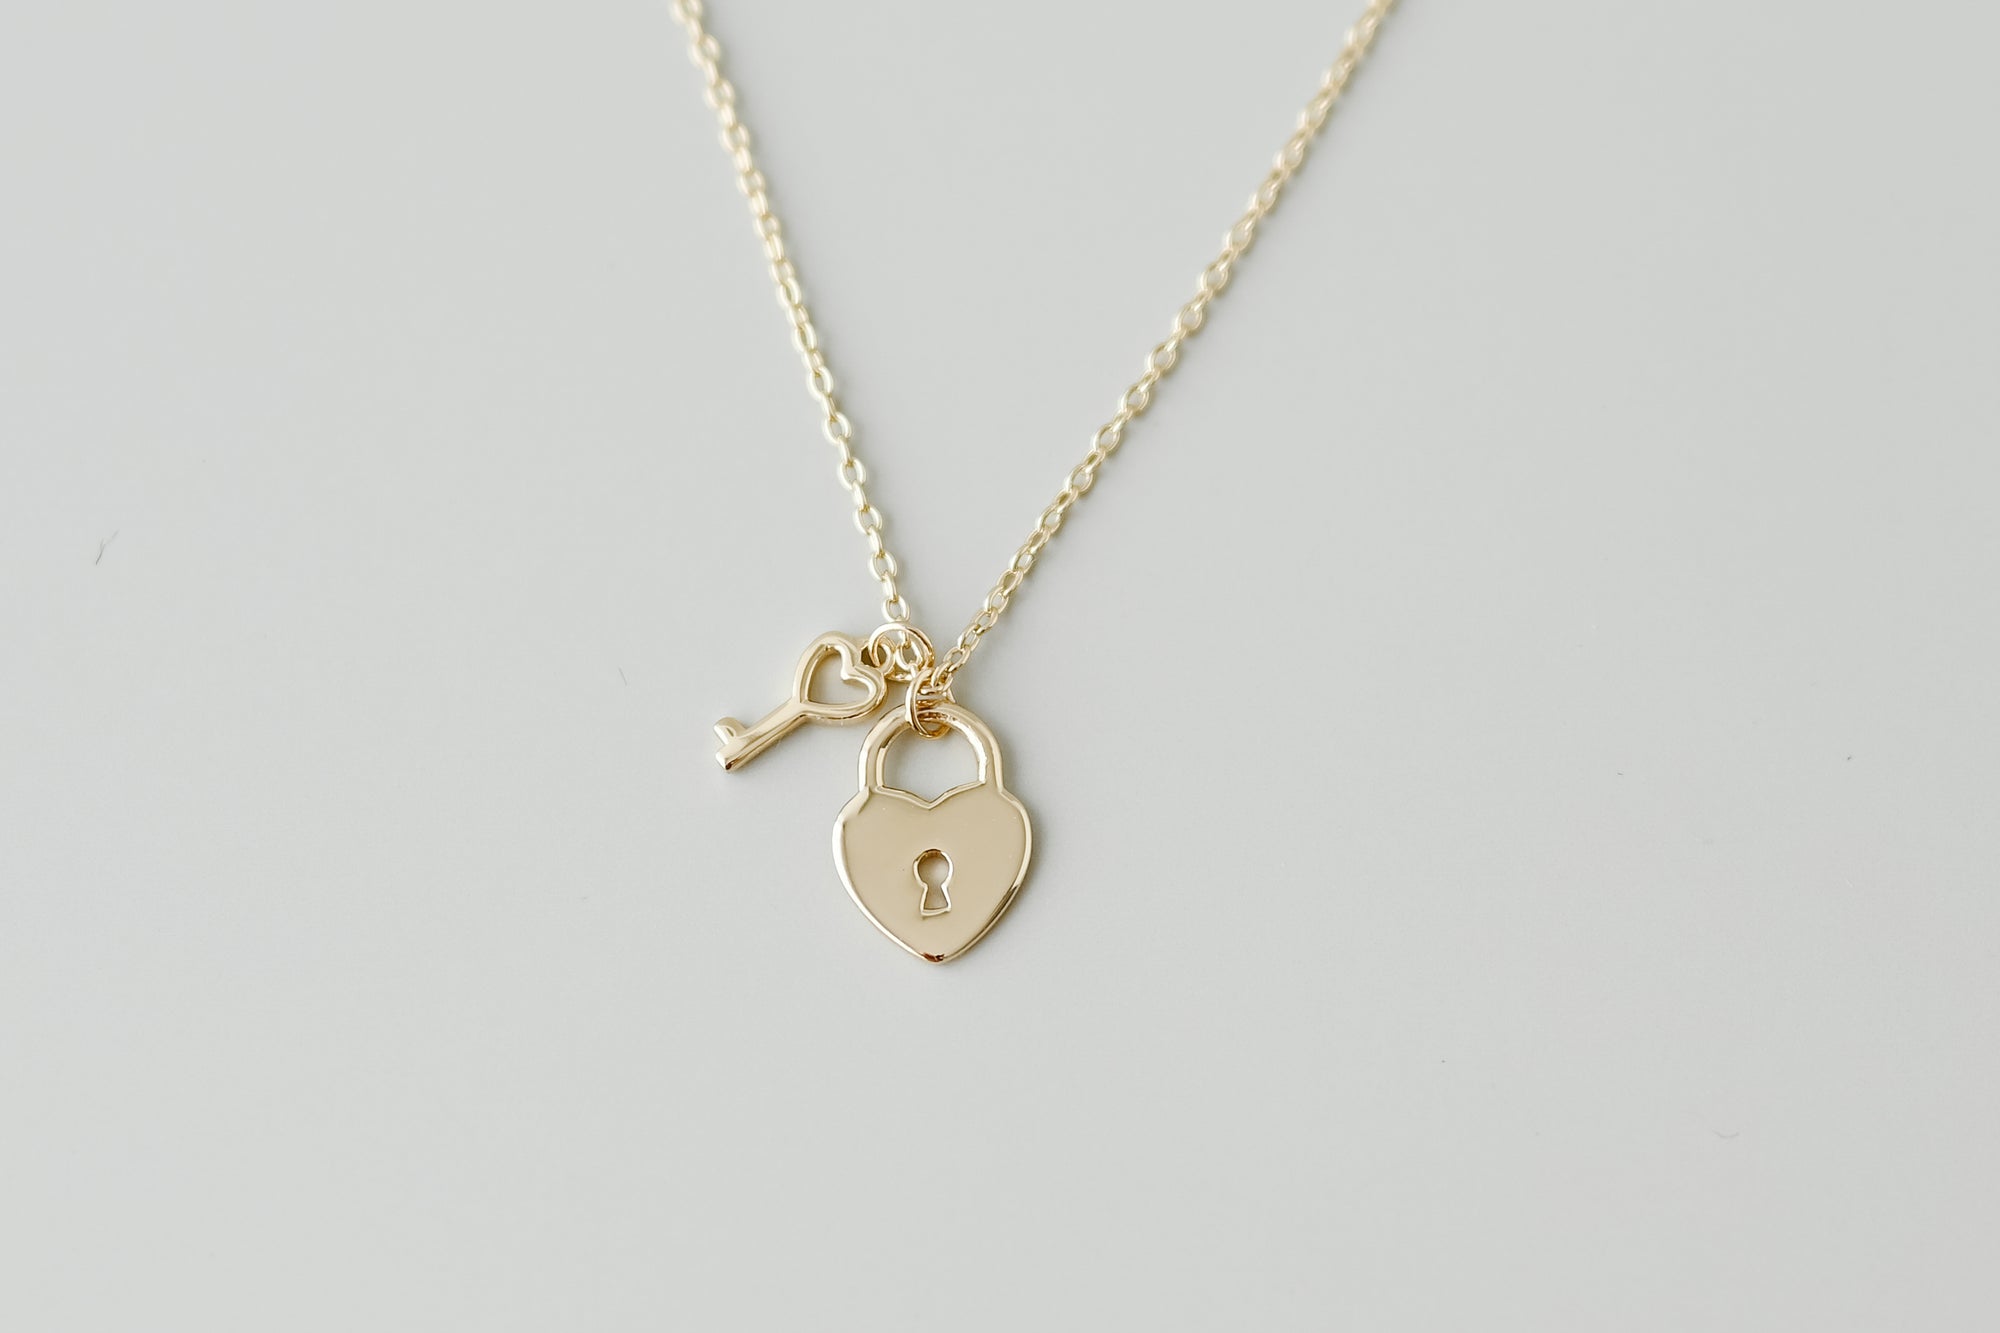 Gold Love Lock Necklace